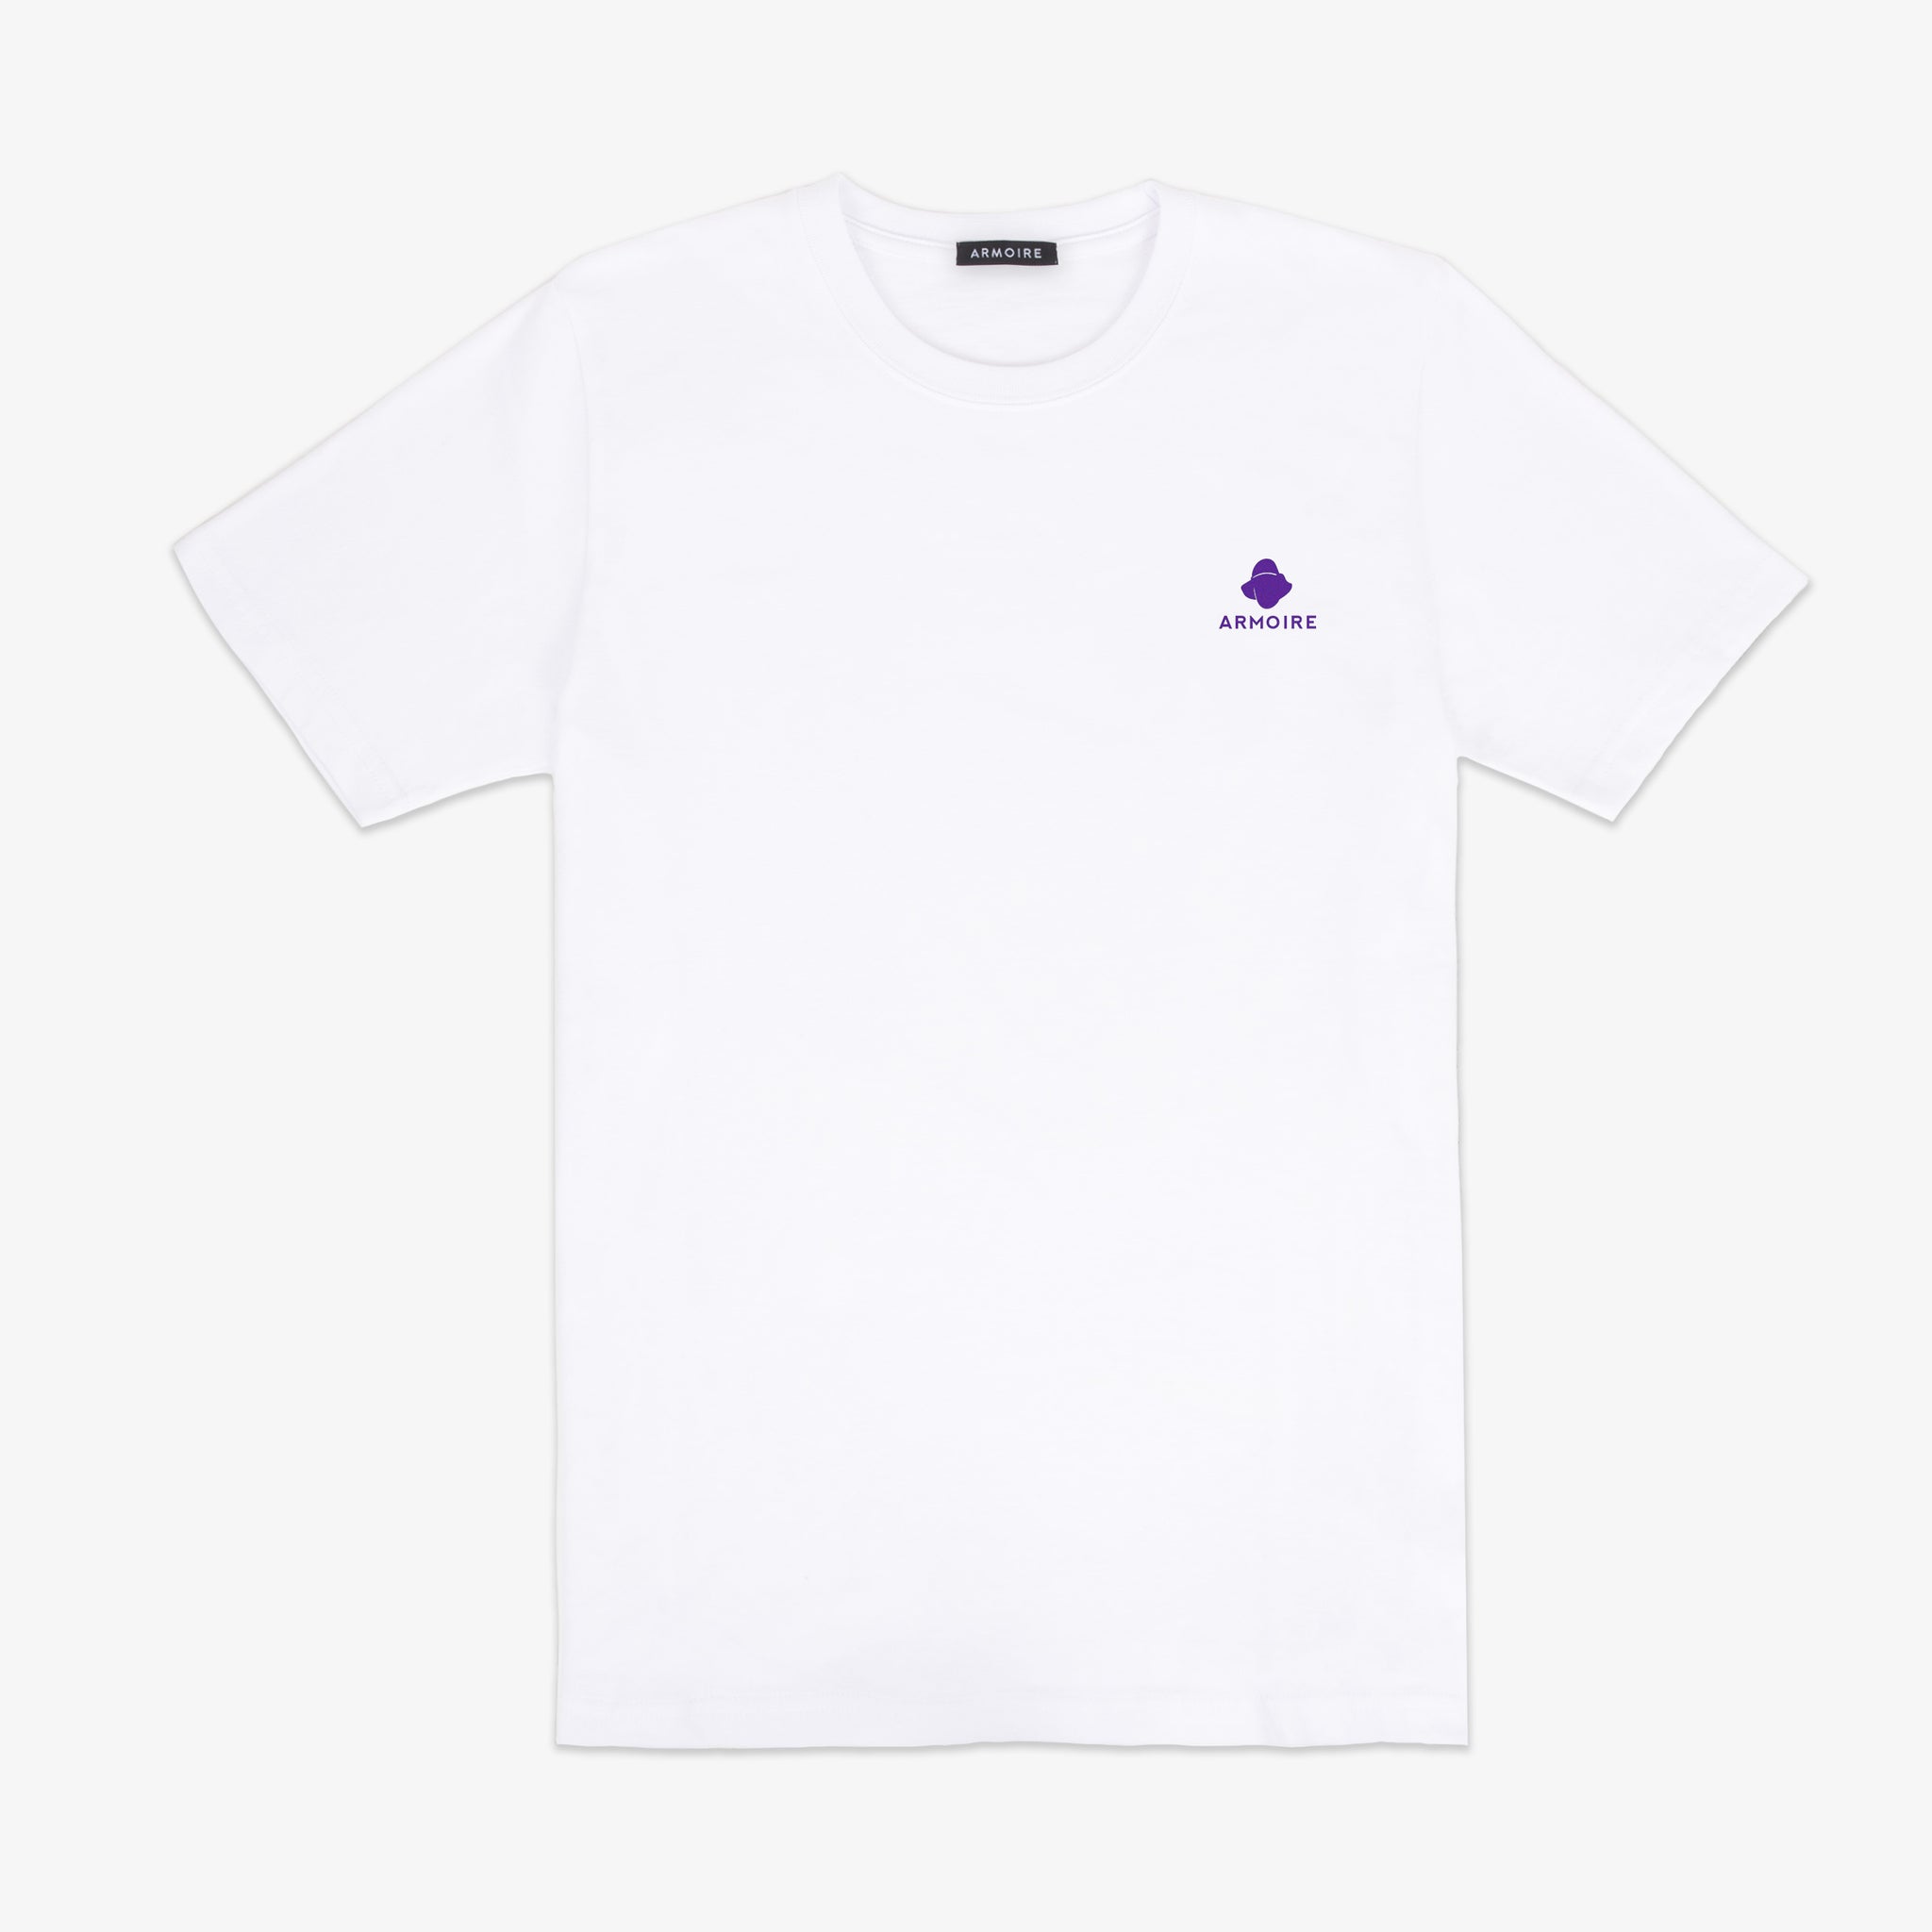 ARMOIRE Traveling Man Tee - White and Purple